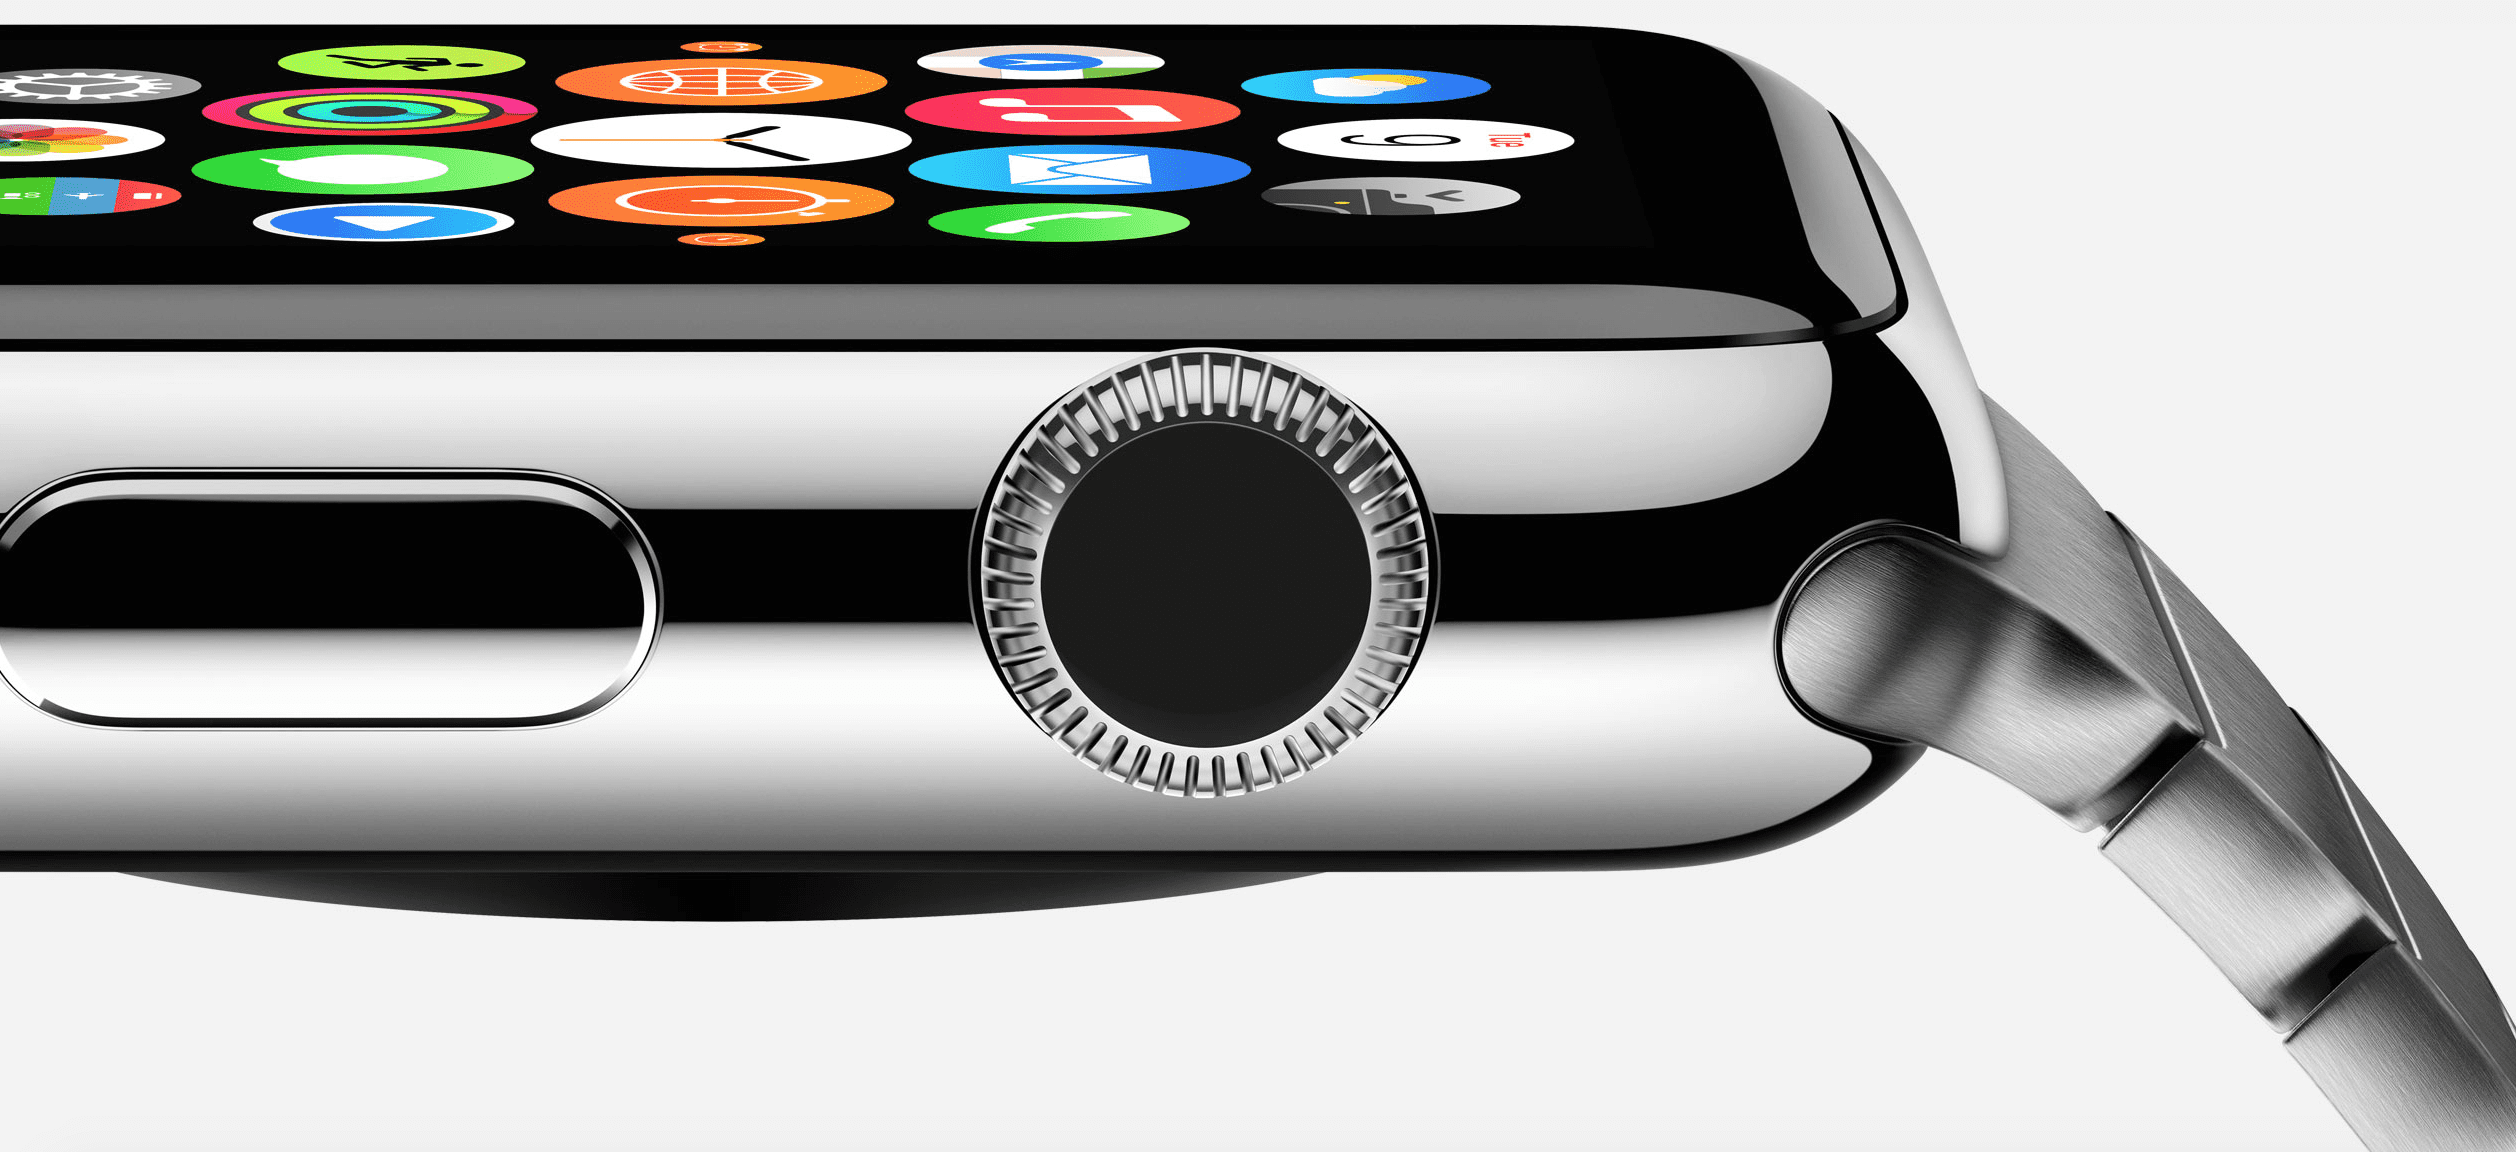 3 Reasons the Apple Watch is a Win for Field Service